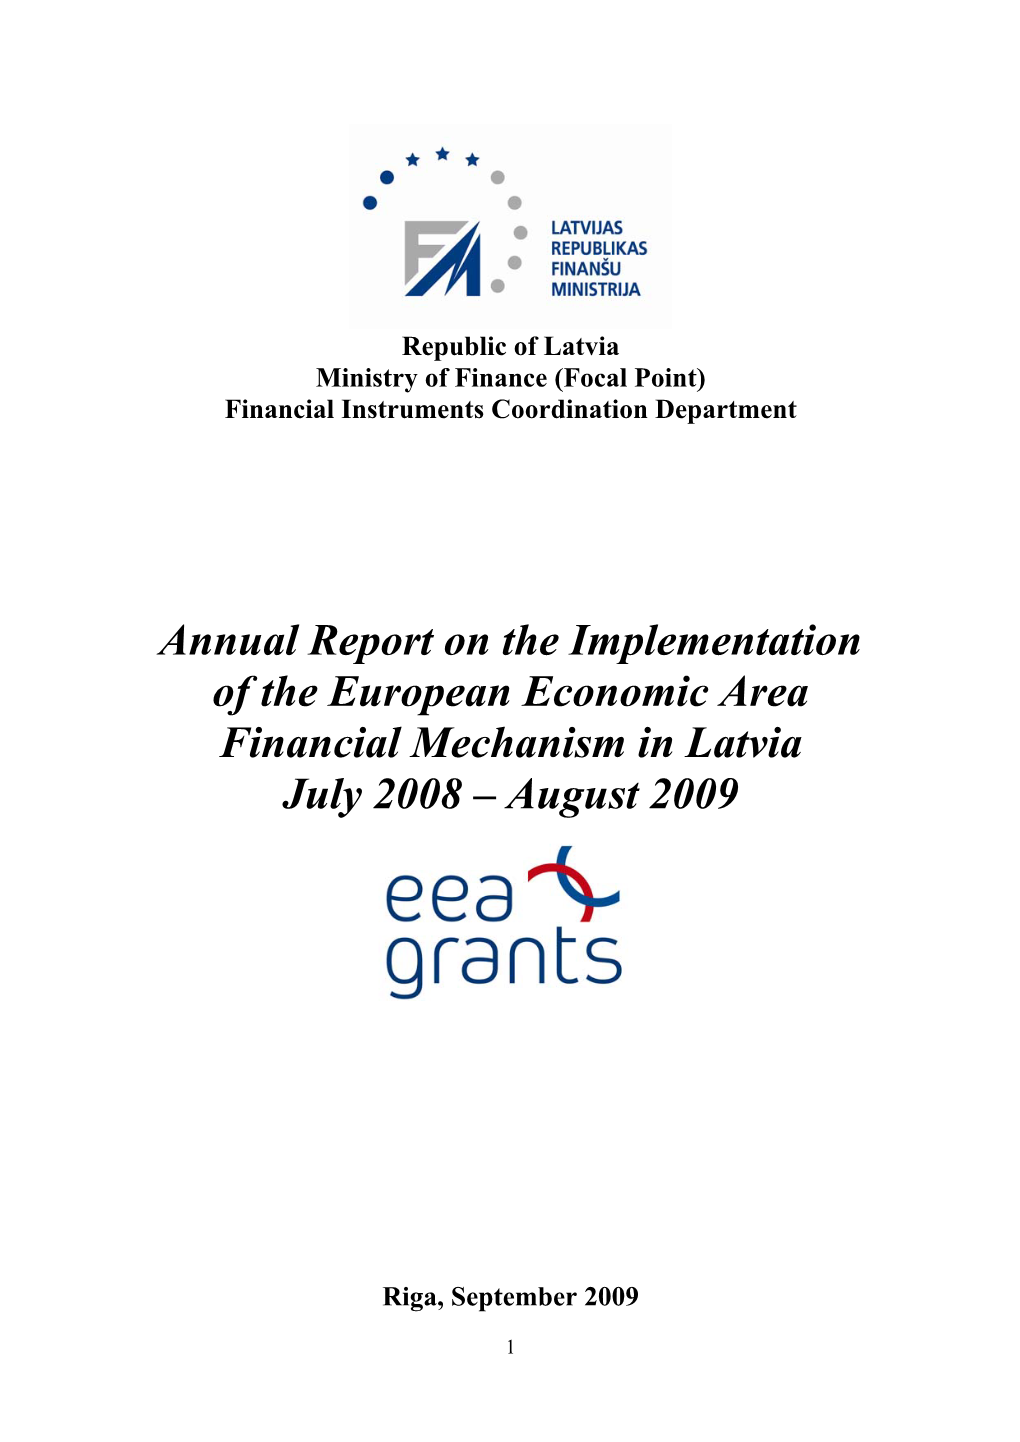 Annual Report on the Implementation of the European Economic Area Financial Mechanism in Latvia July 2008 – August 2009